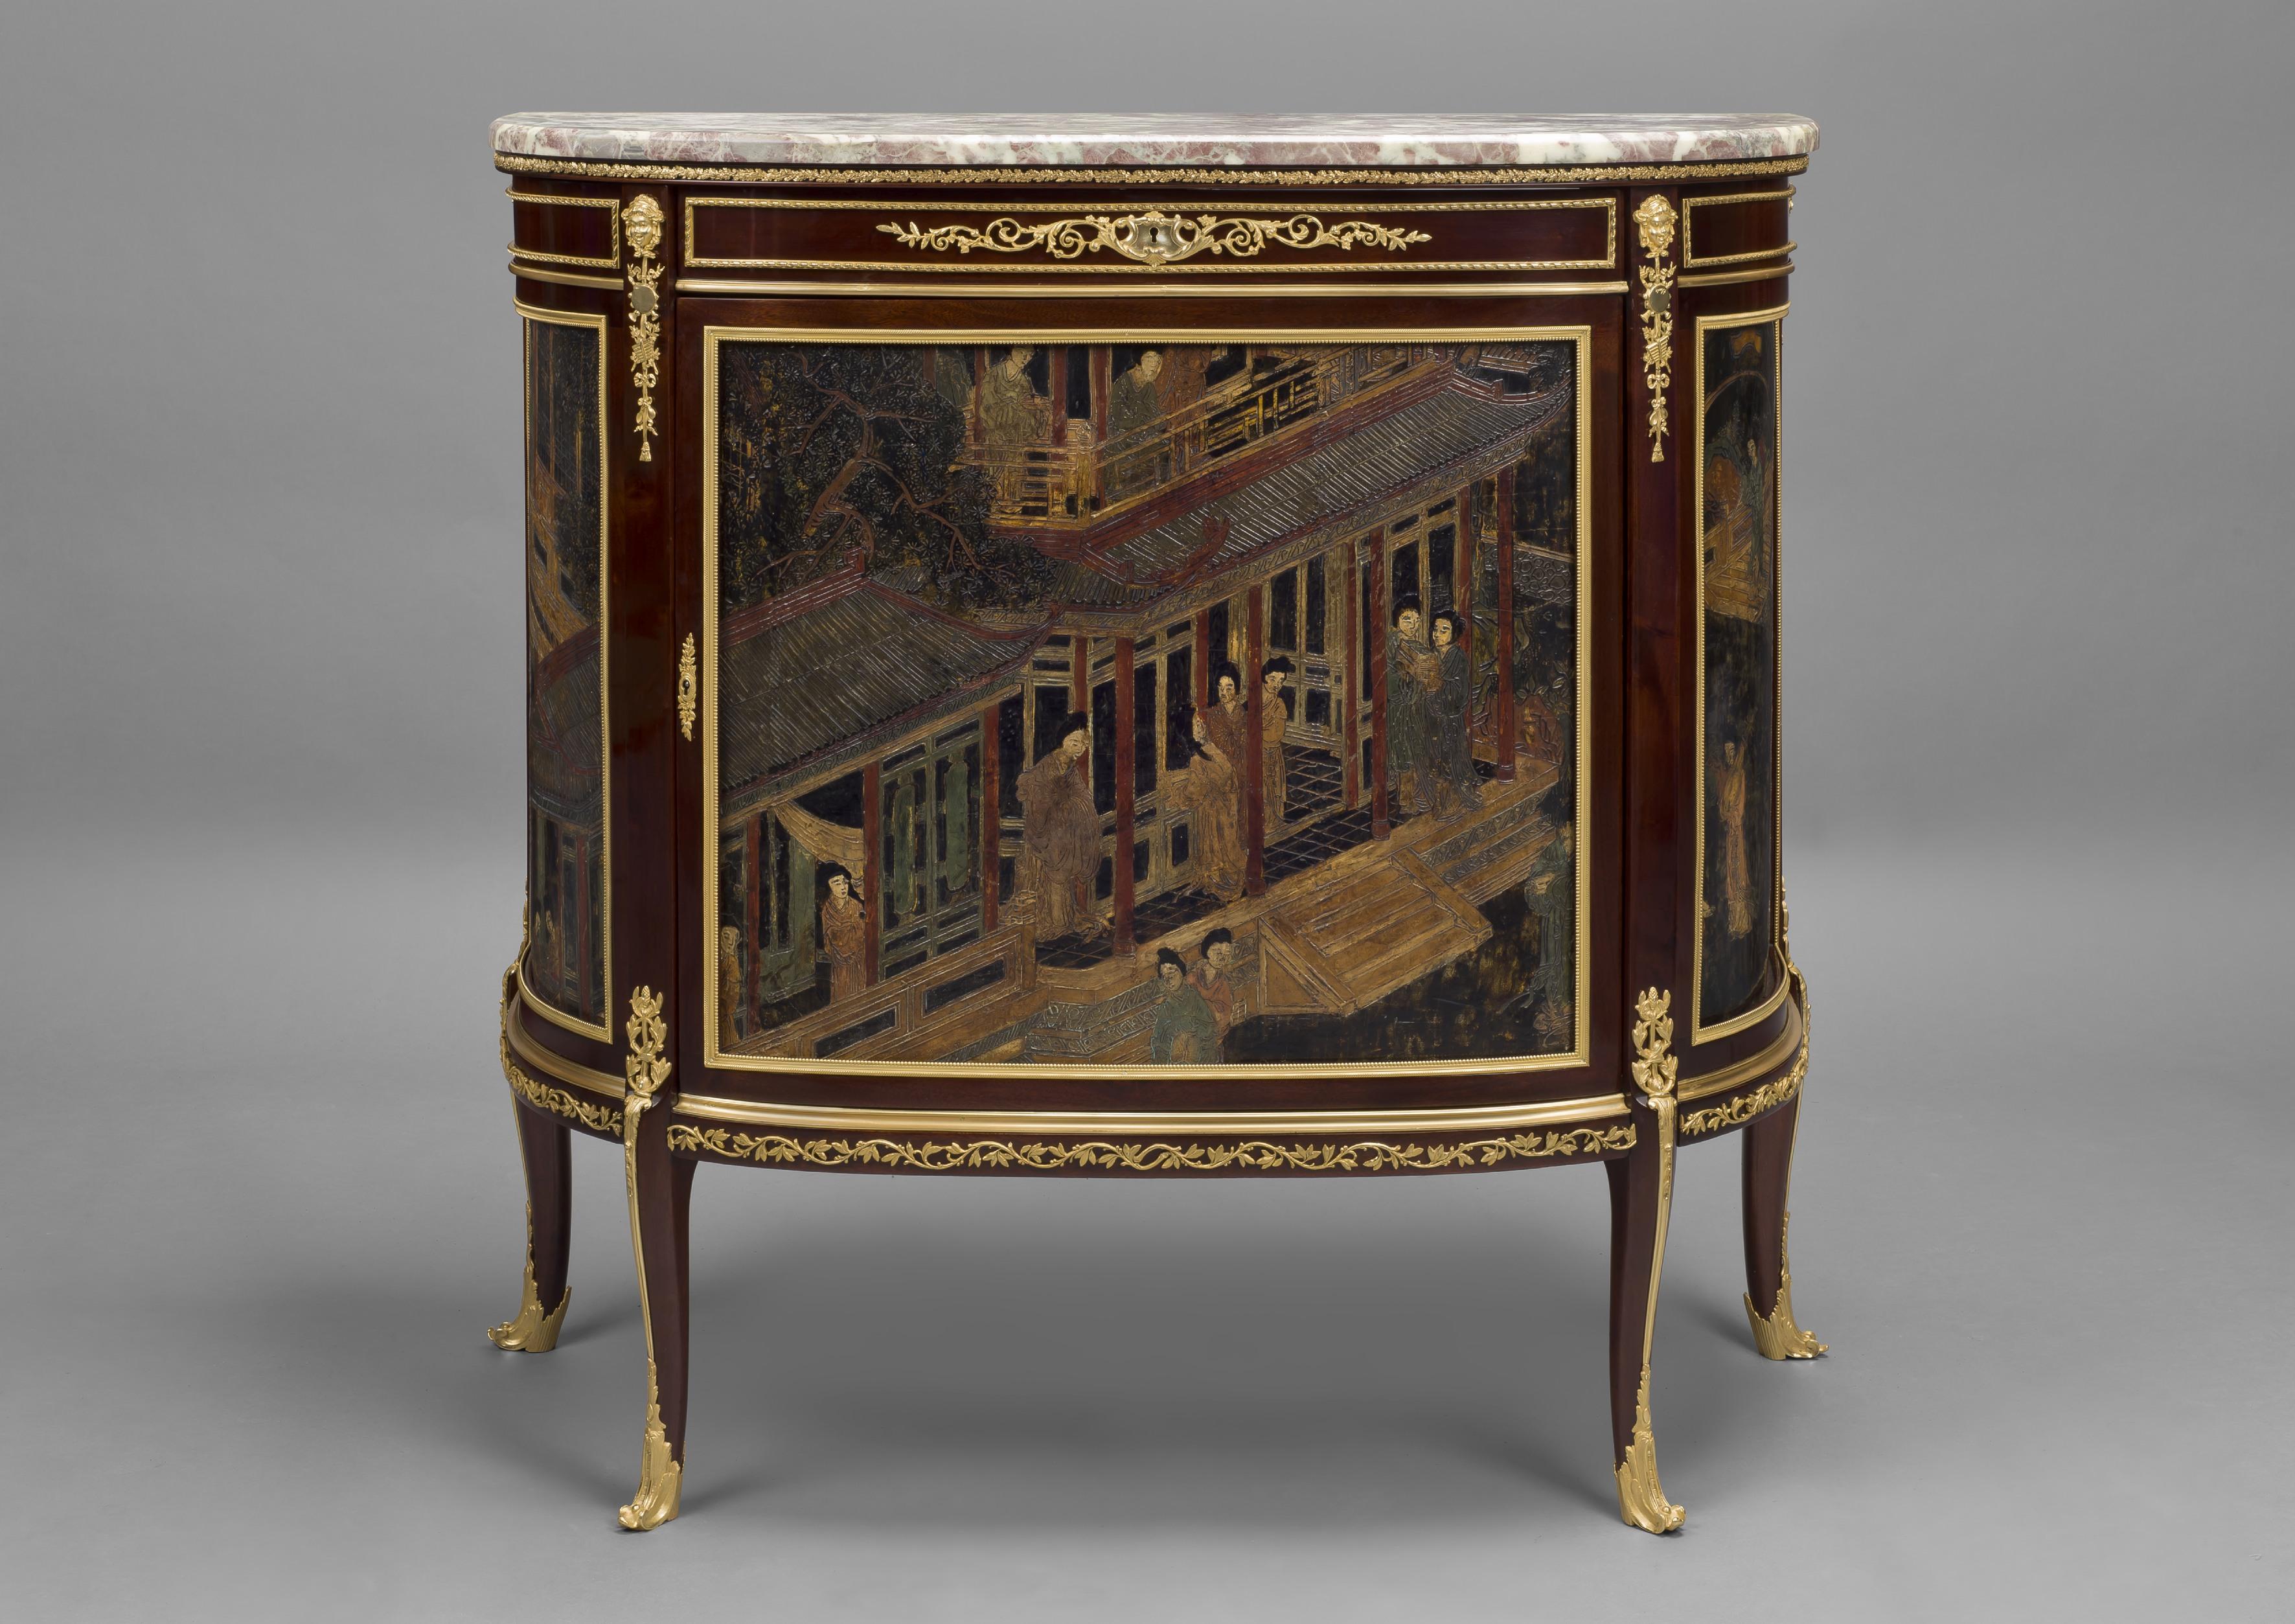 A fine Louis XVI Style gilt bronze mounted mahogany and Coromandel lacquer, demilune commode, by François Linke.

French, circa 1890. 

Signed 'Linke' to the gilt bronze mounts. 

This fine commode has a shaped marble top above a gilt bronze